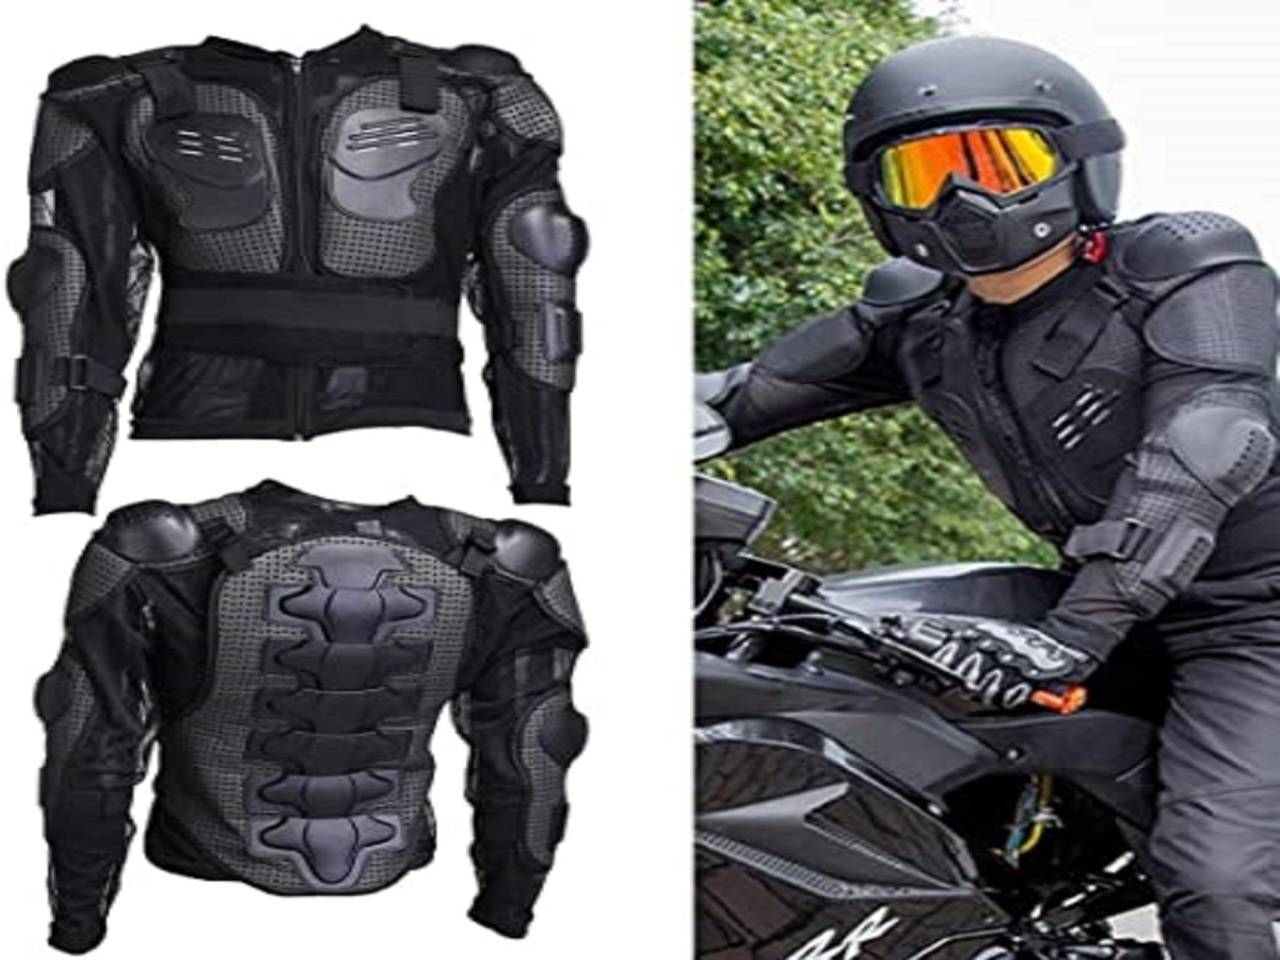 Finest motorcycle protective gears for passionate riders